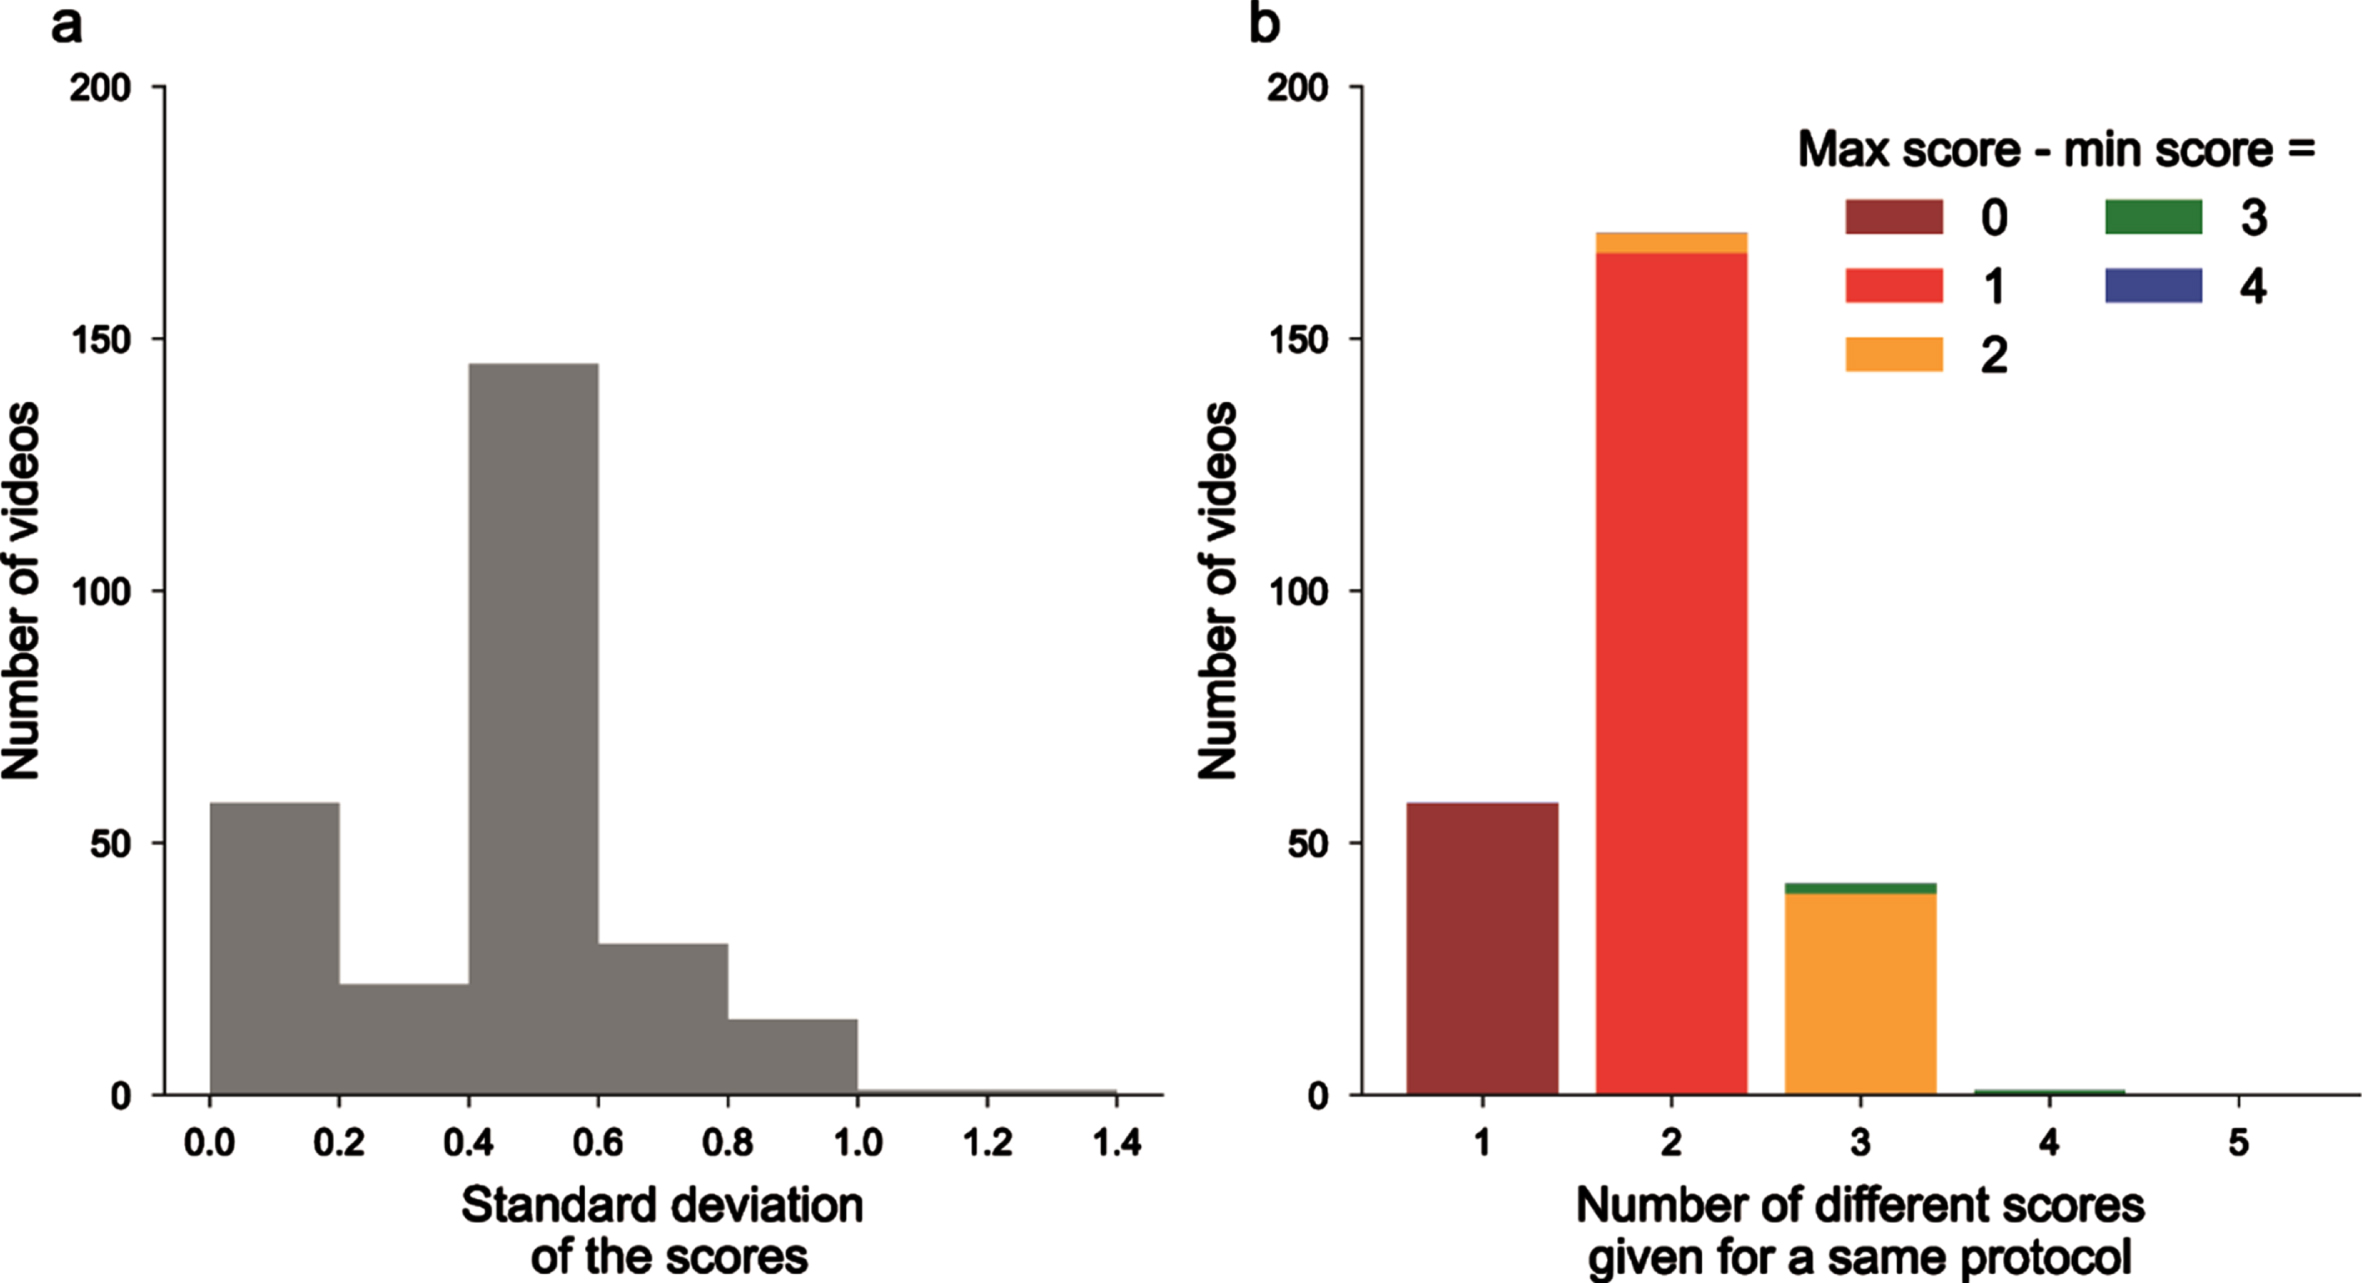 Unreliability of MDS-UPDRS scores across neurologists’ ratings. a) Histogram of the standard deviations (computed for each video, on the 5 different MDS-UPRS scores); b) videos ranked by the number of different MDS-UPDRS scores given by the physicians, colors for the difference between maximum and minimum scores.